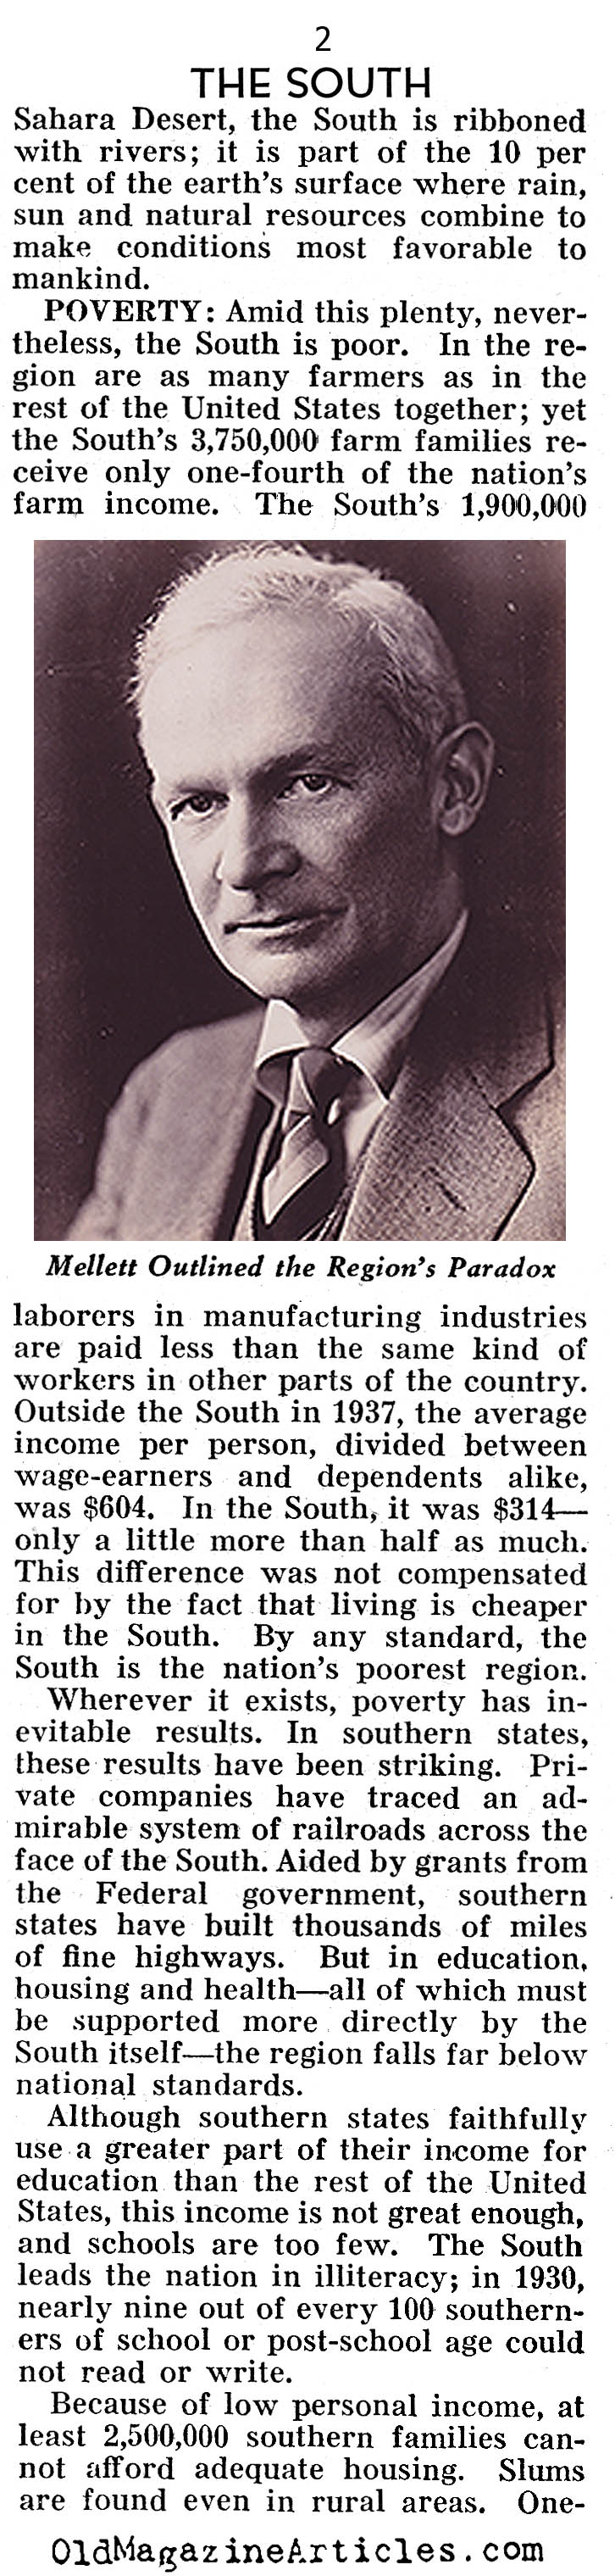 The Great Depression in the South (Pathfinder Magazine, 1938)